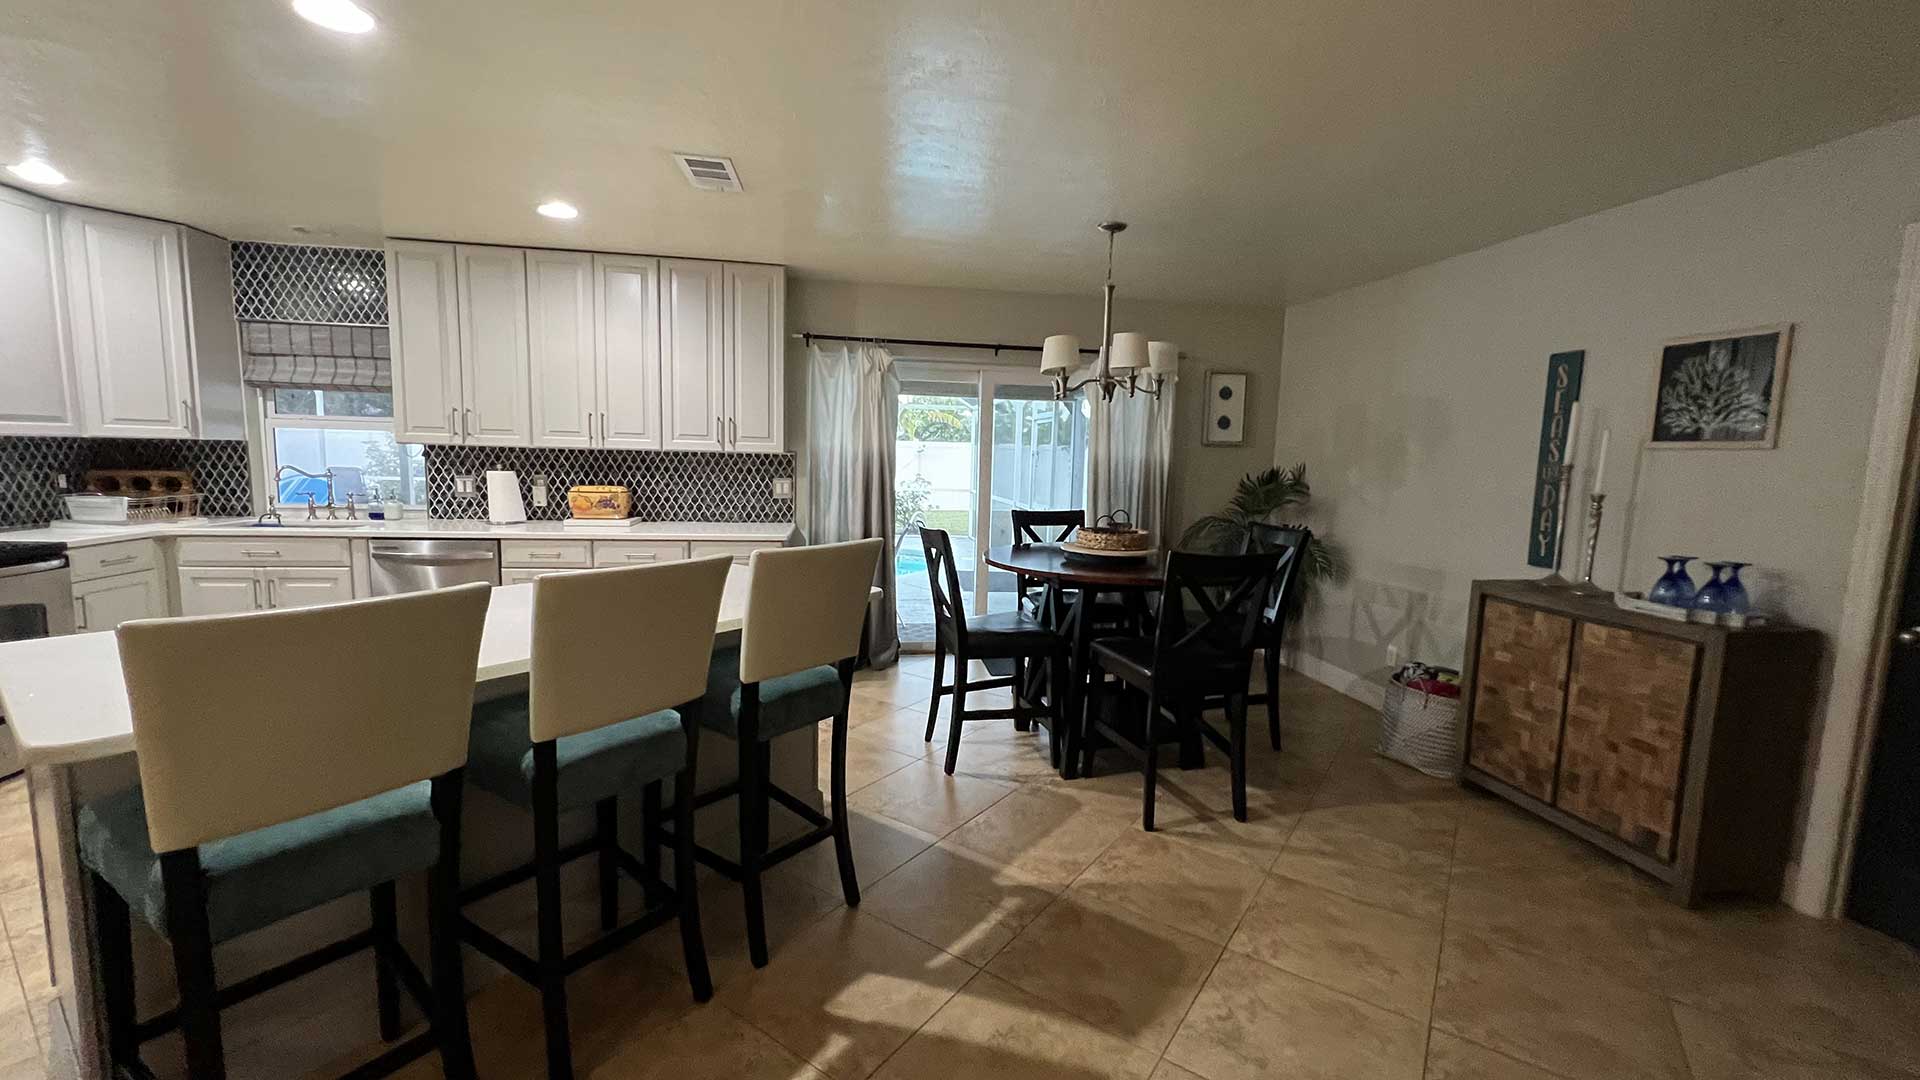 House deep cleaning - Jan 5 | Goldmillio cleaning service in Cape Coral https://www.google.com/maps/place/?cid=2863543821522134674